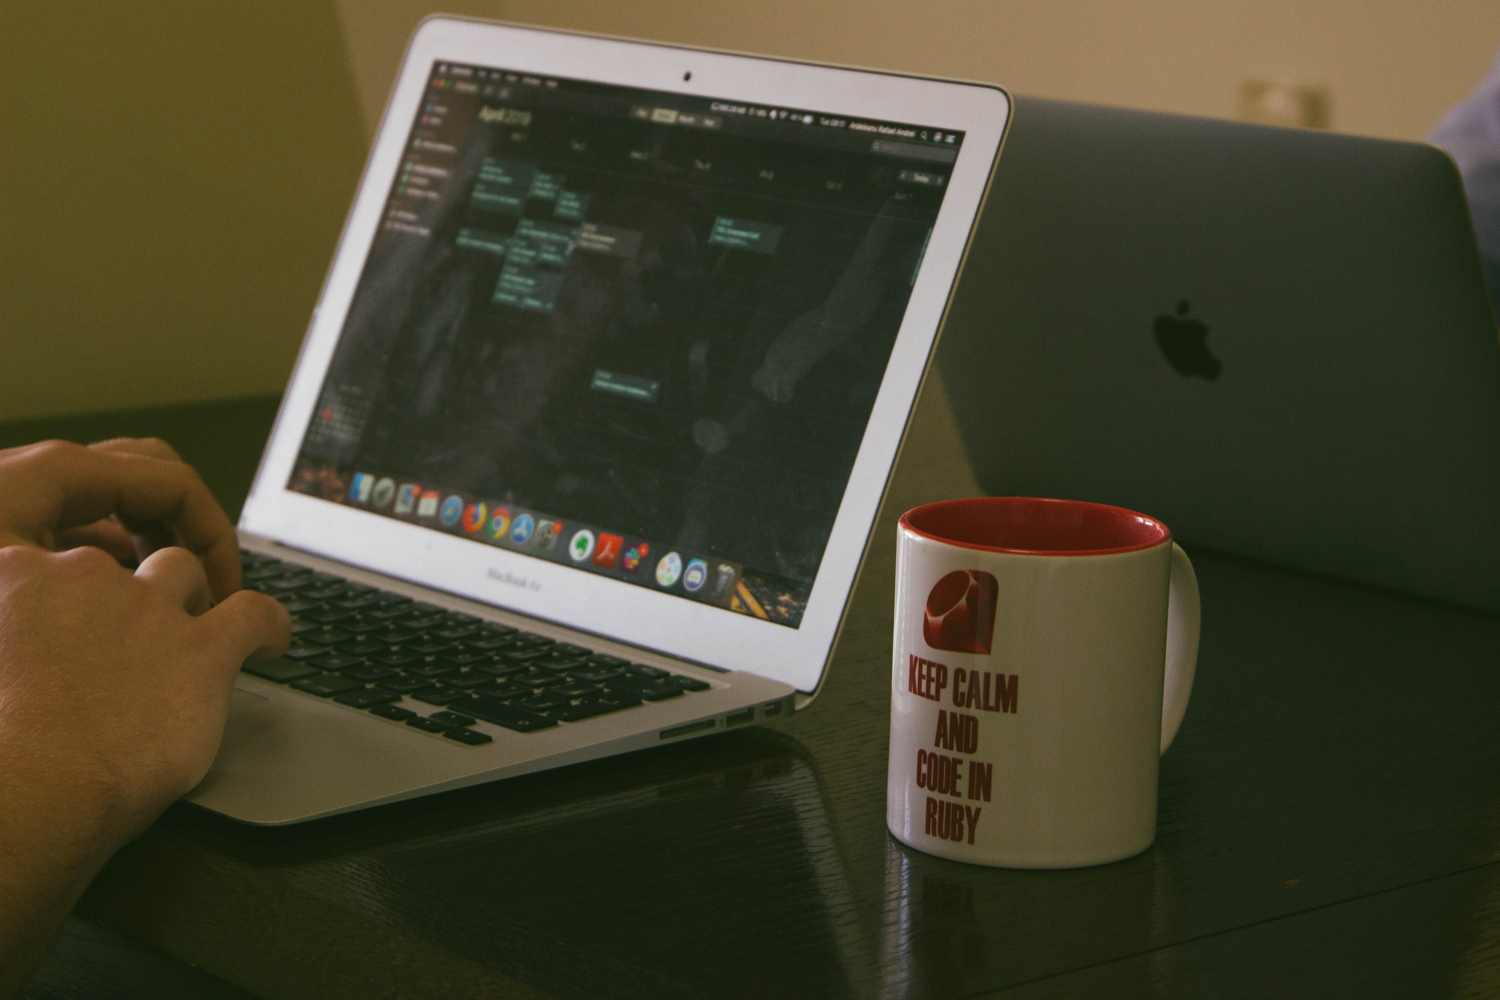 keep calm and code in ruby mug and laptop